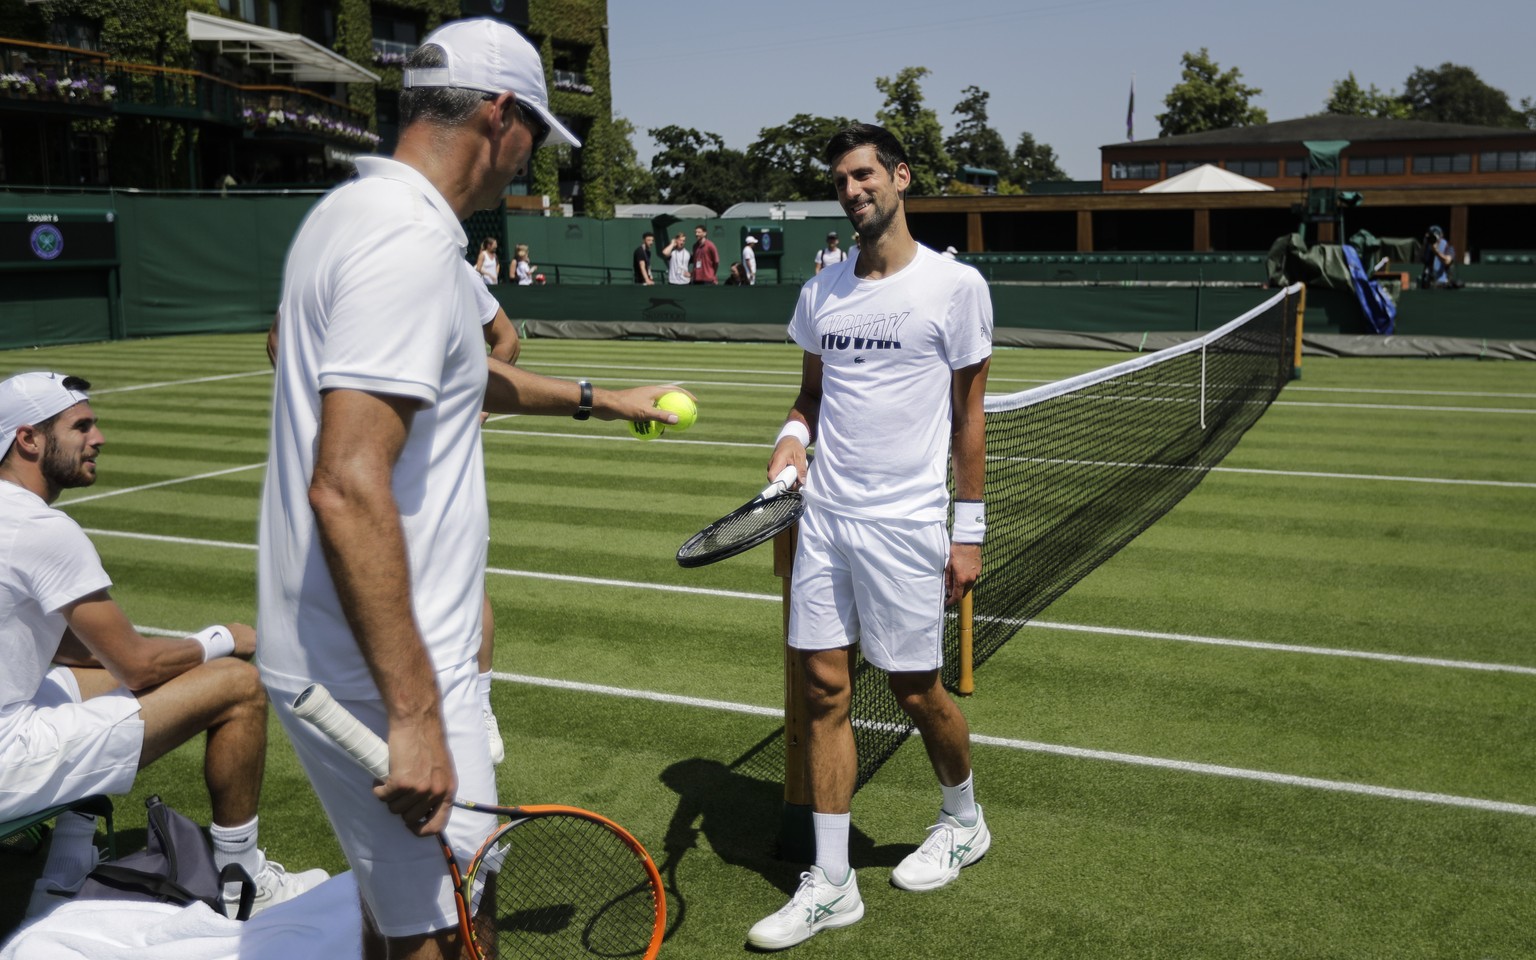 Serbia&#039;s Novak Djokovic attends a practice session ahead of the Wimbledon Tennis Championships in London Saturday, June 29, 2019. The Wimbledon Tennis Championships starts on Monday, July 1 and r ...